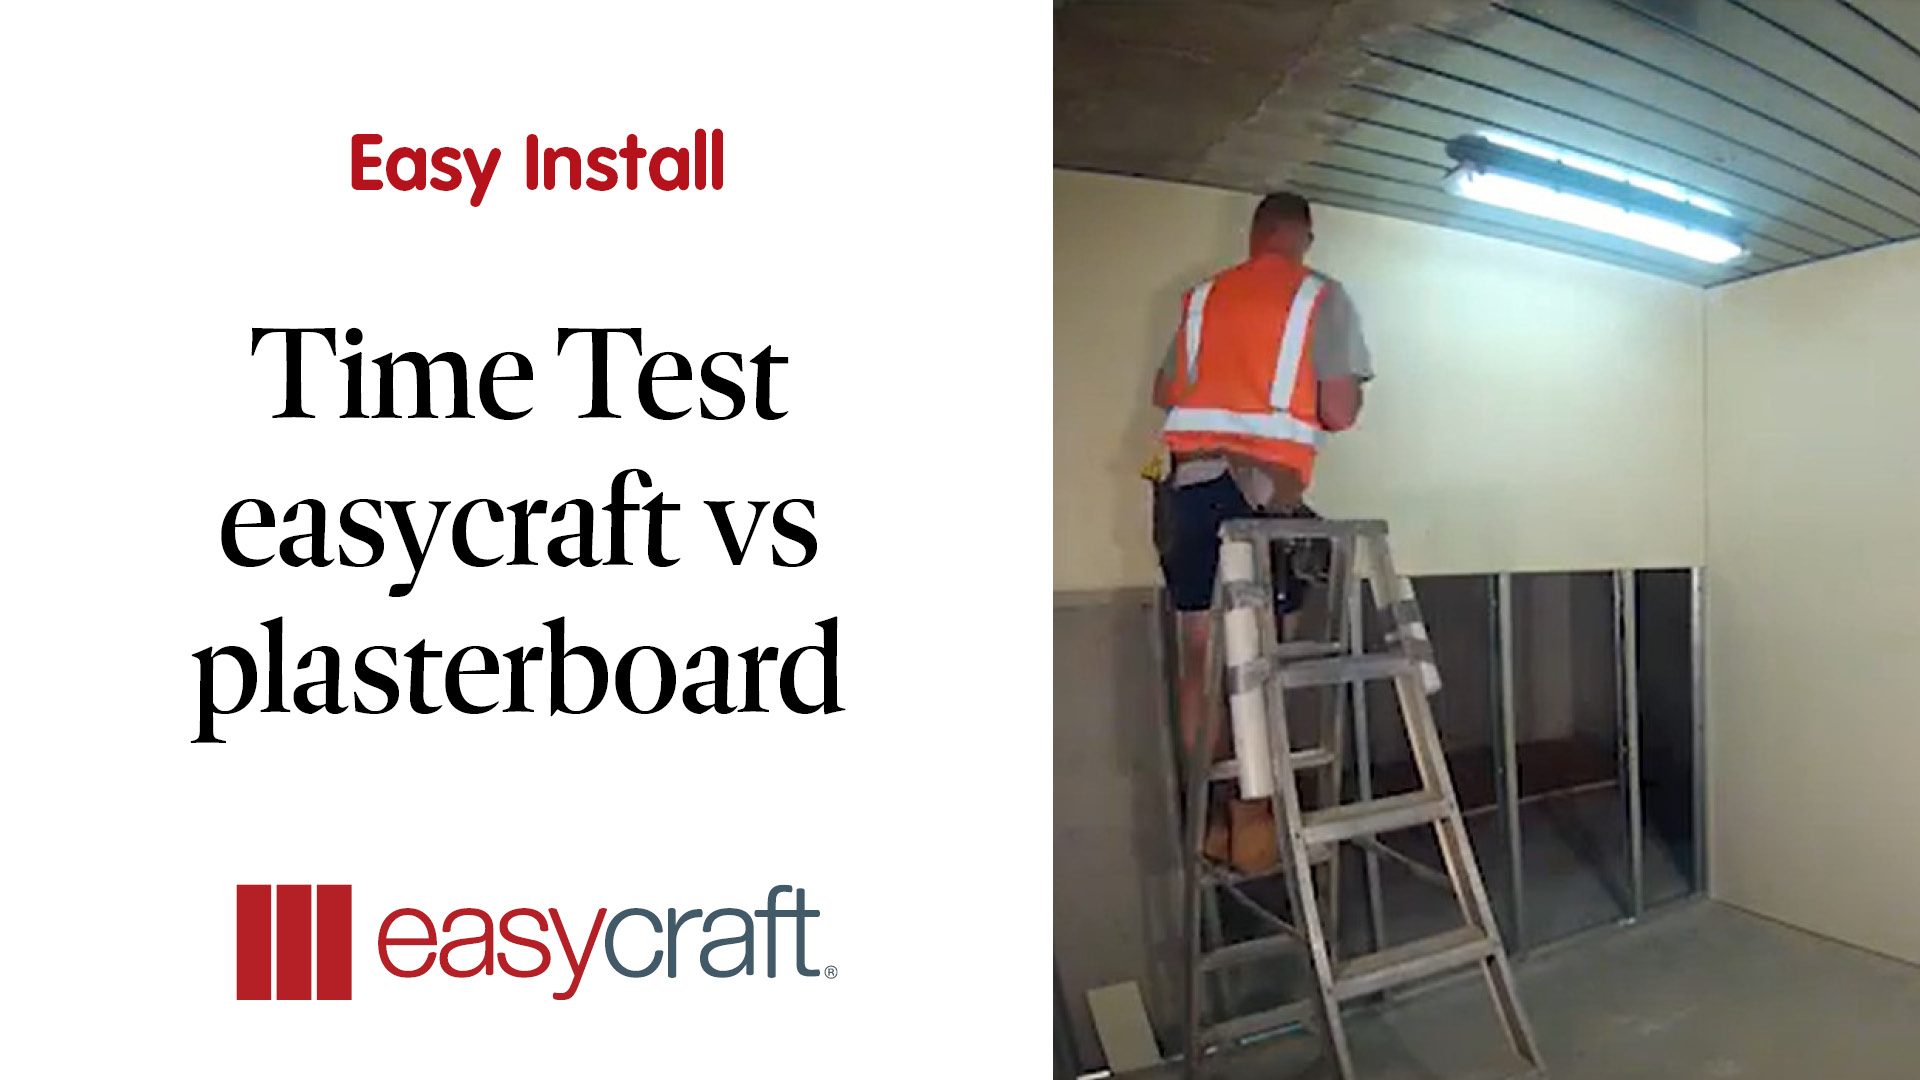 Time to Install - easycraft vs Plasterboard